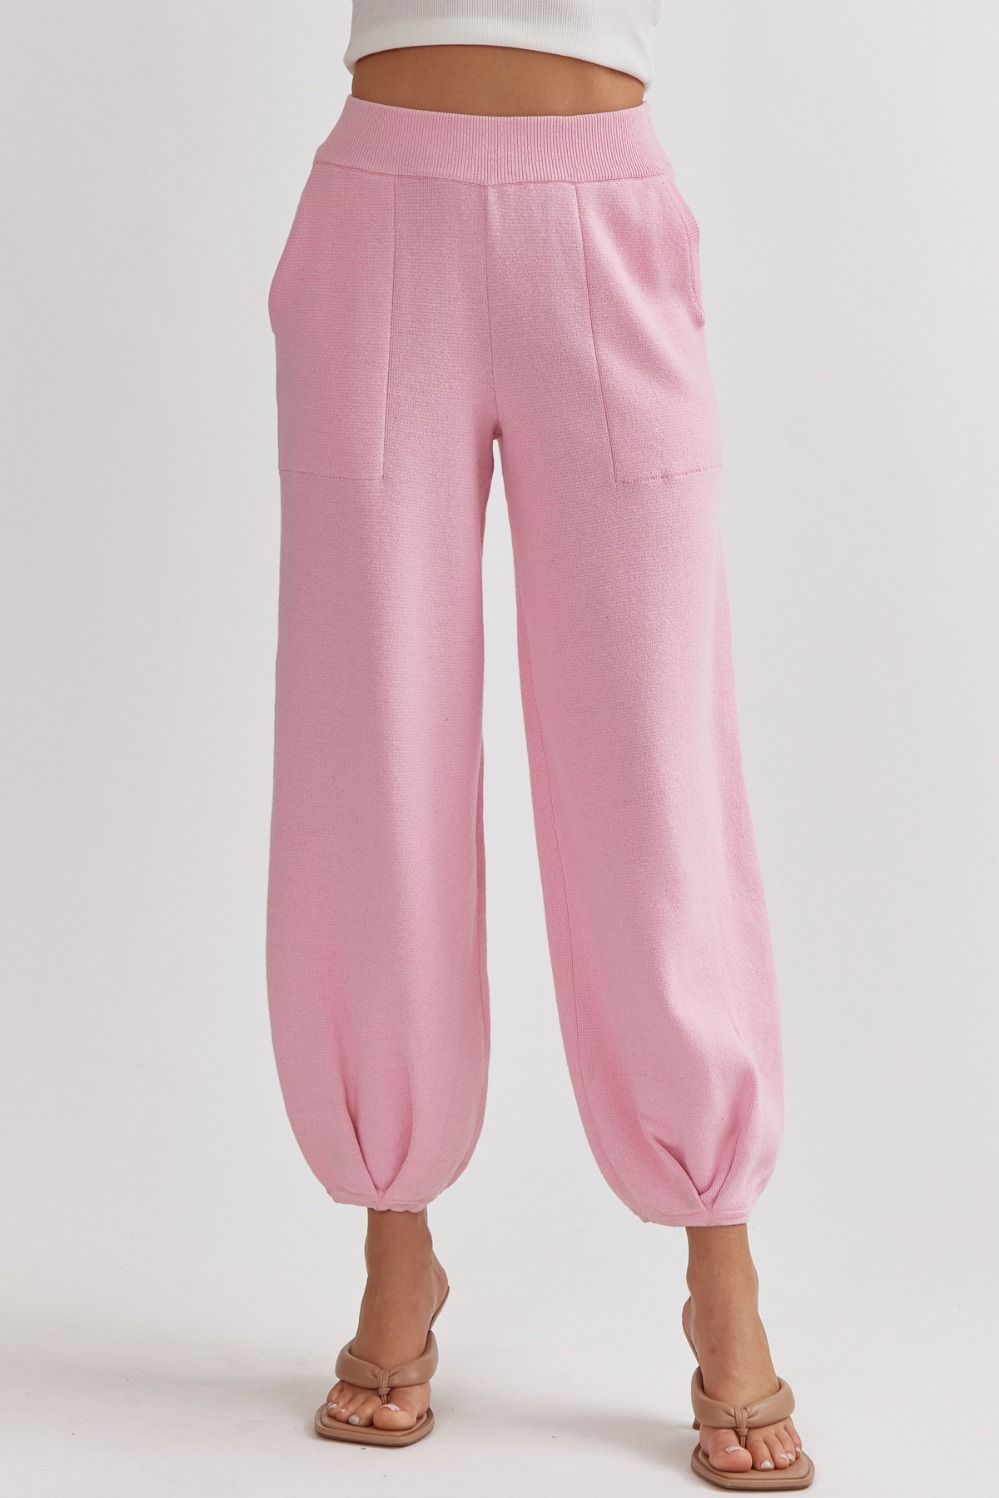 IN THE CLOUDS PANT